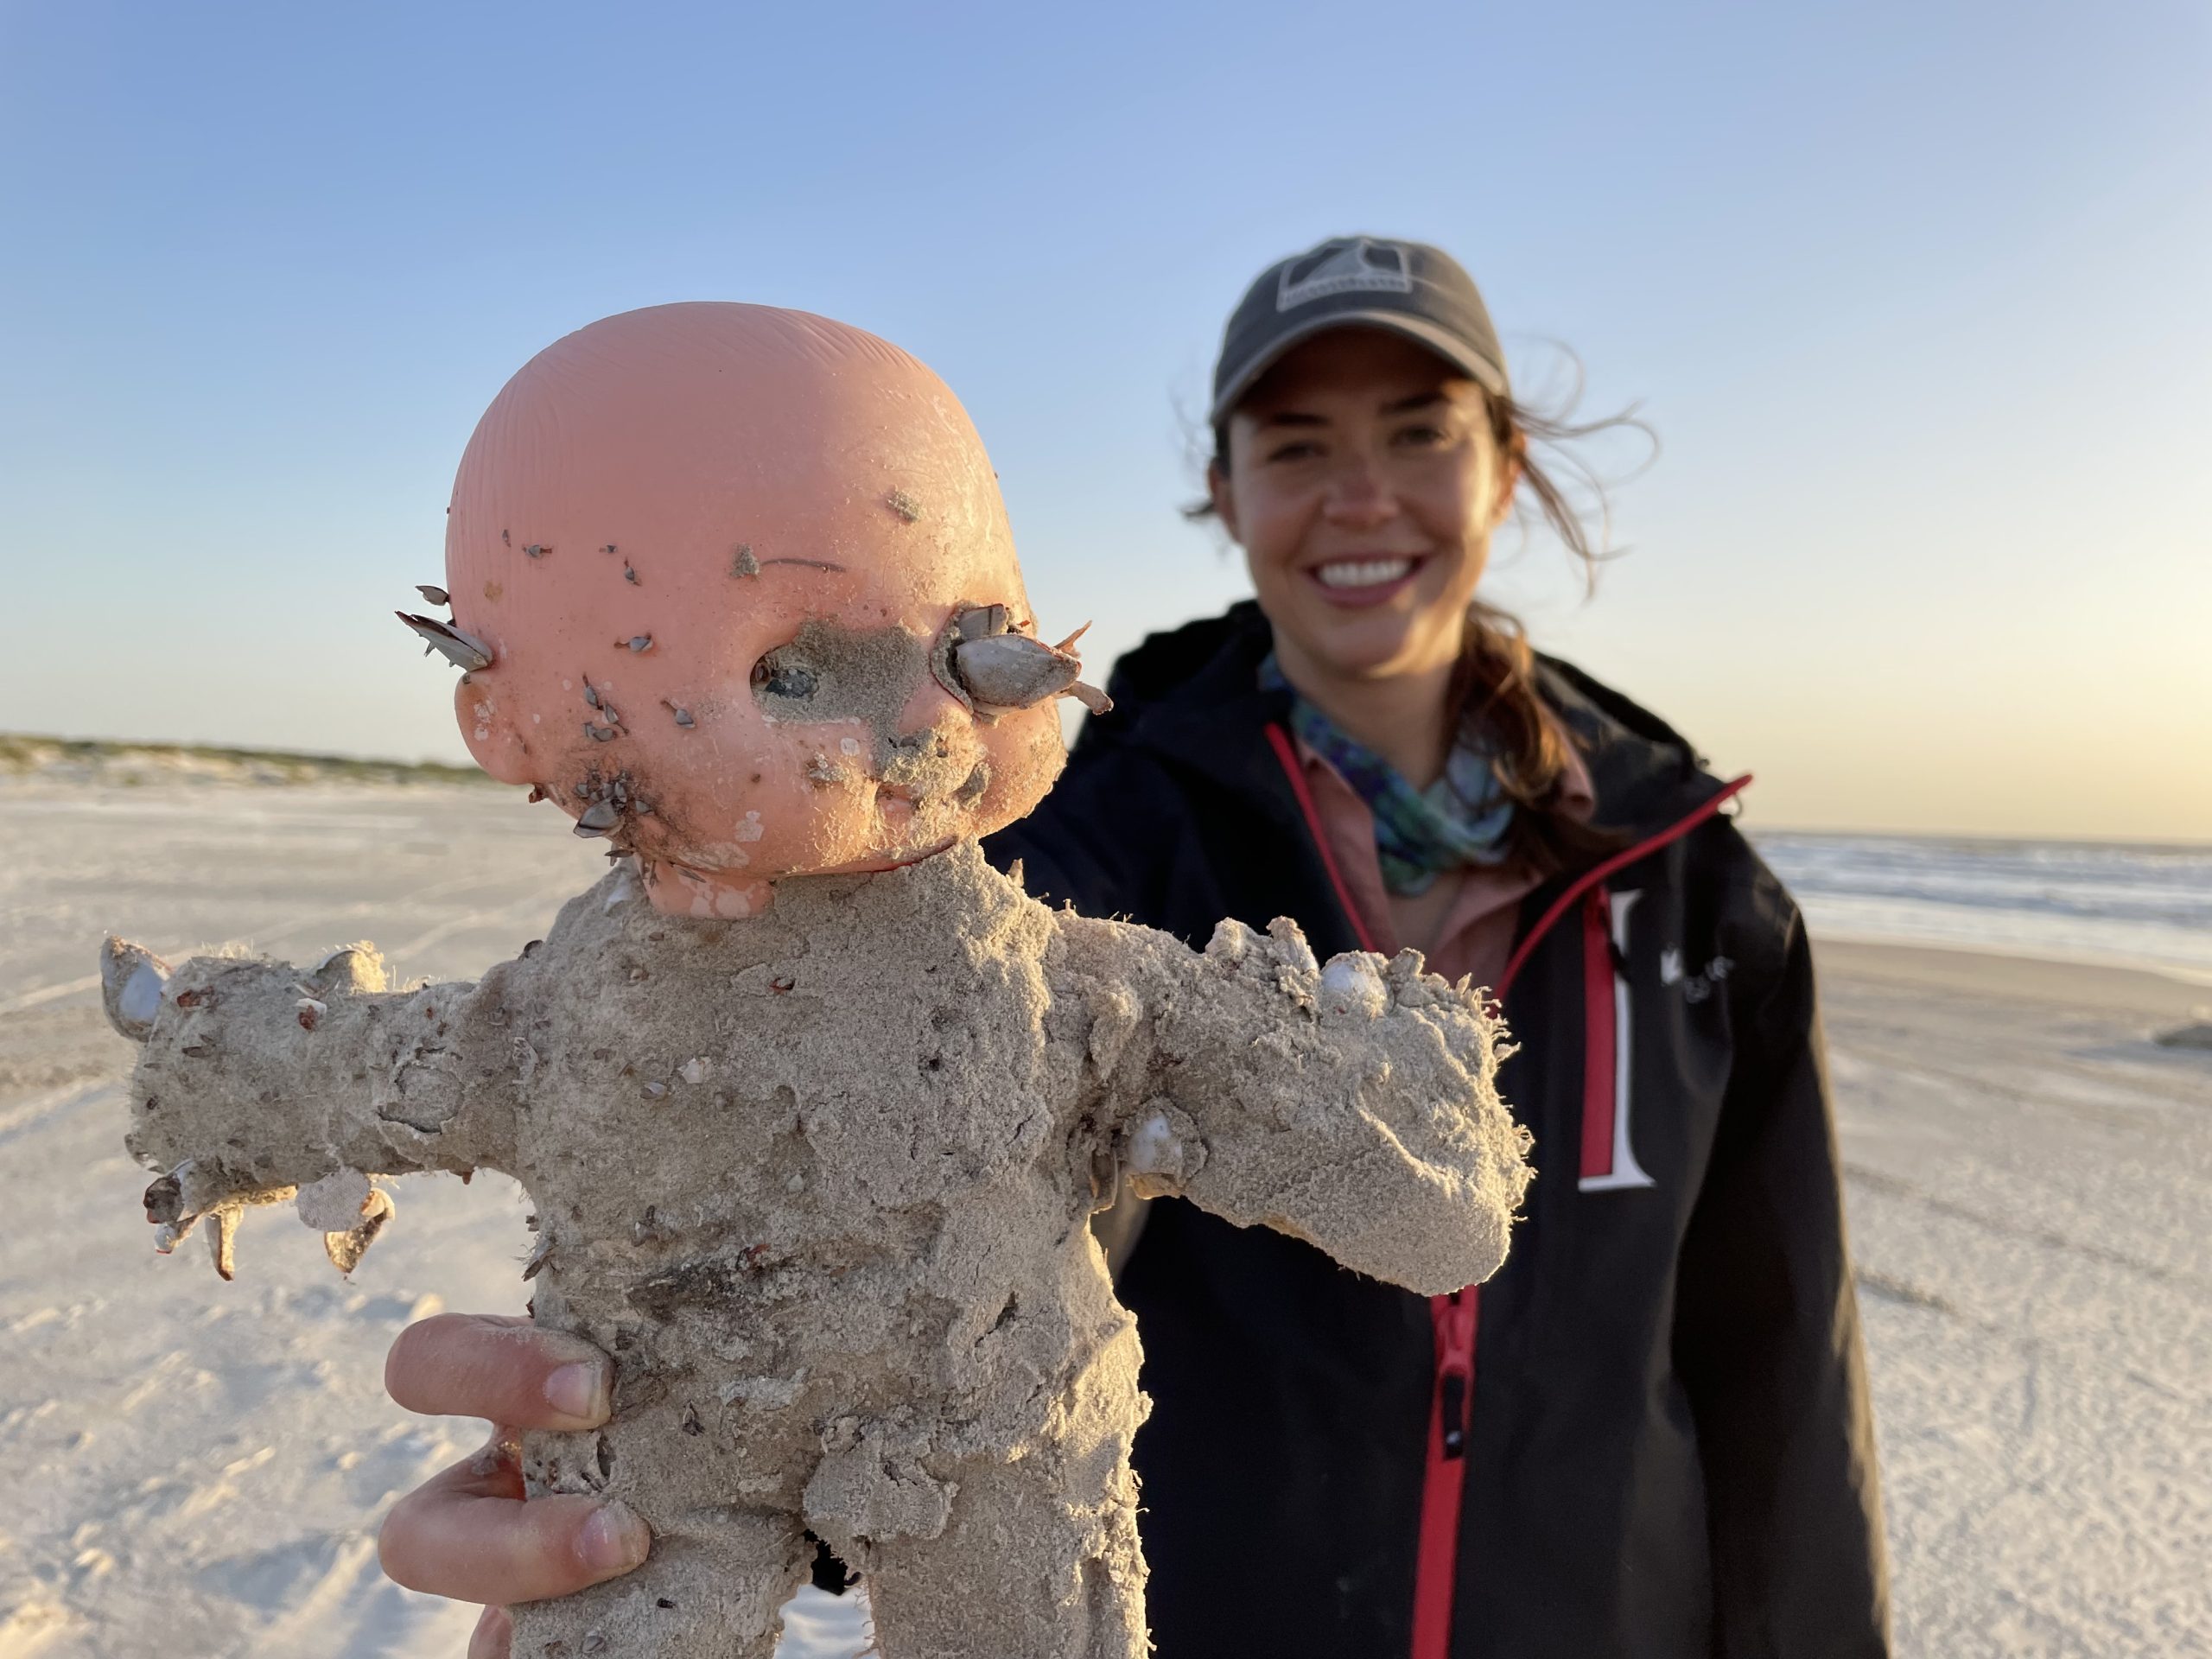 Researcher holds creepy baby doll with sand pouring out of its eyes on the beach.